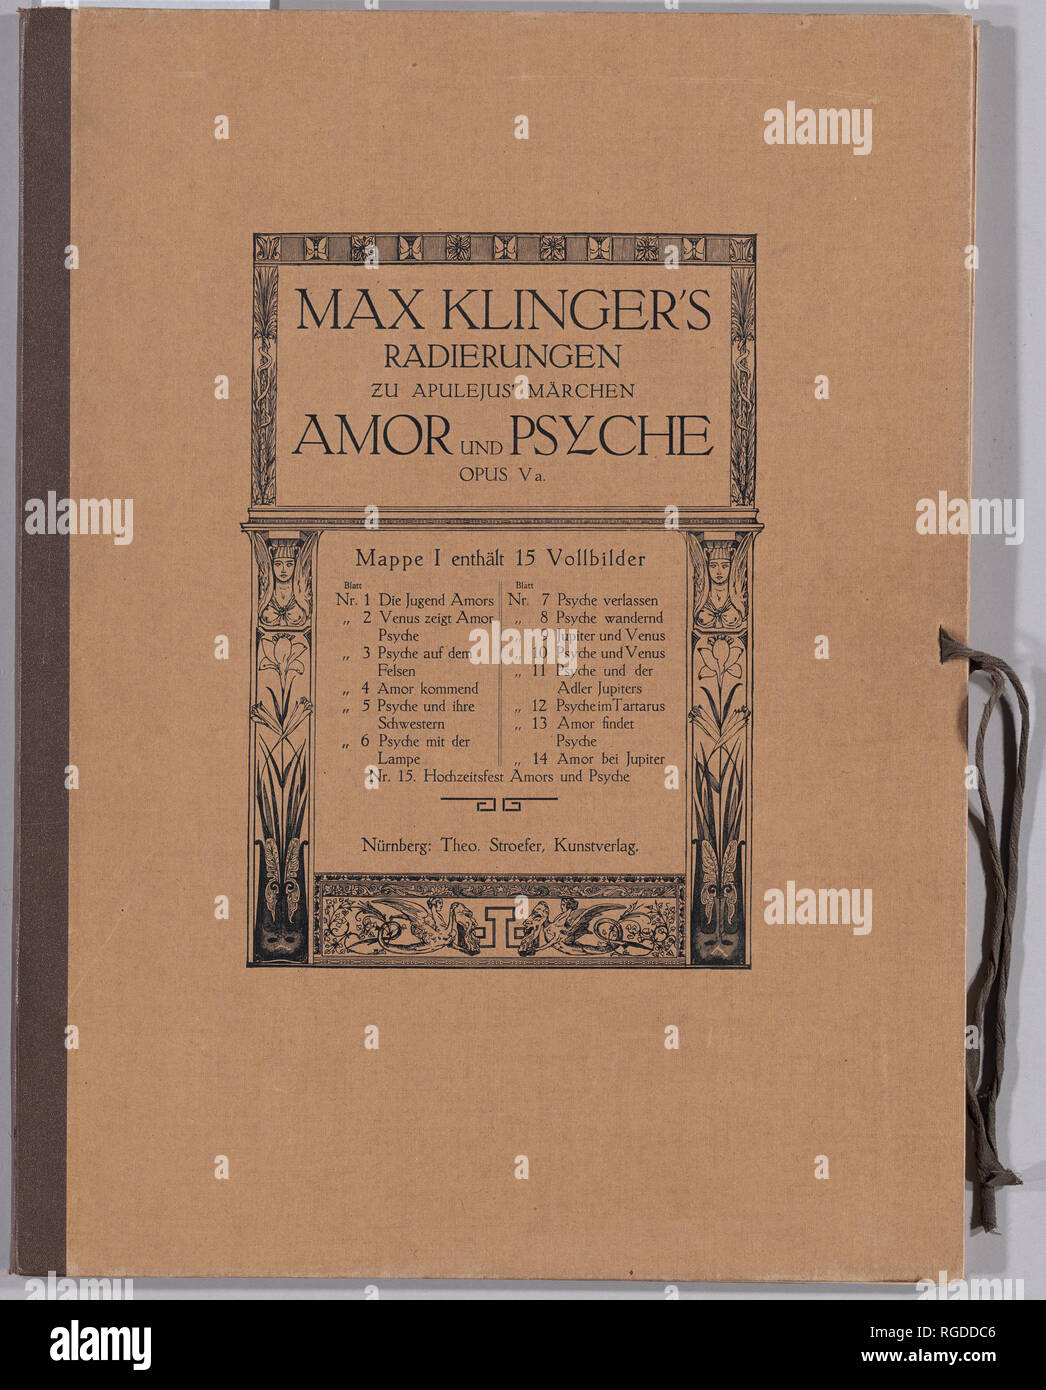 Amor und Psyche [Opus Va]. Dated: 1880, this edition printed 1893/1907. Dimensions: overall: 42.7 × 32 × 1 cm (16 13/16 × 12 5/8 × 3/8 in.)  plate: 36.3 × 27.3 cm (14 5/16 × 10 3/4 in.)  sheet: 42.5 × 31.3 cm (16 3/4 × 12 5/16 in.). Medium: portfolio with 15 sheets of etchings, some with aquatint and roulette on wove paper. Museum: National Gallery of Art, Washington DC. Author: Max Klinger. Stock Photo